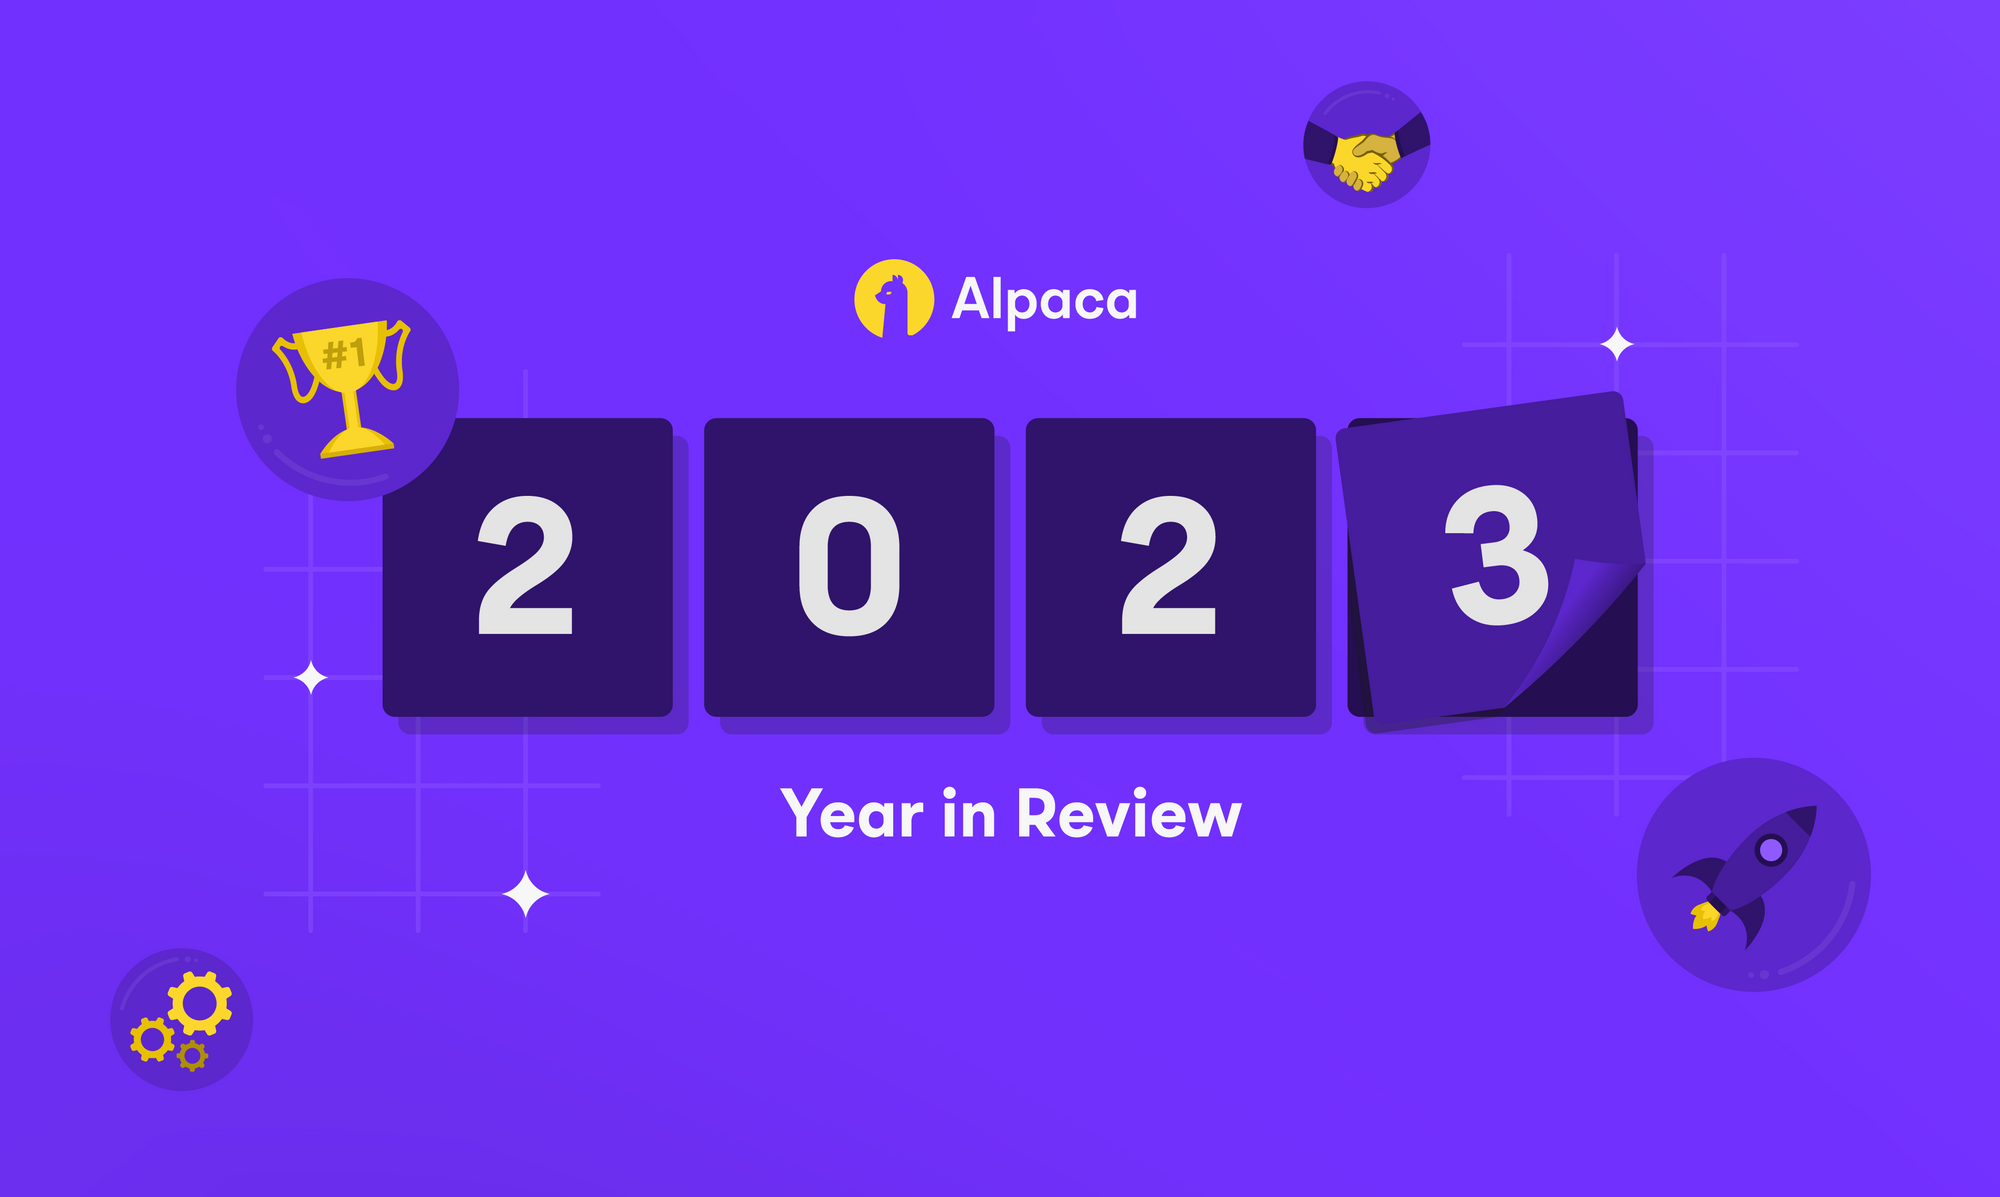 Alpaca's 2023 Year in Review